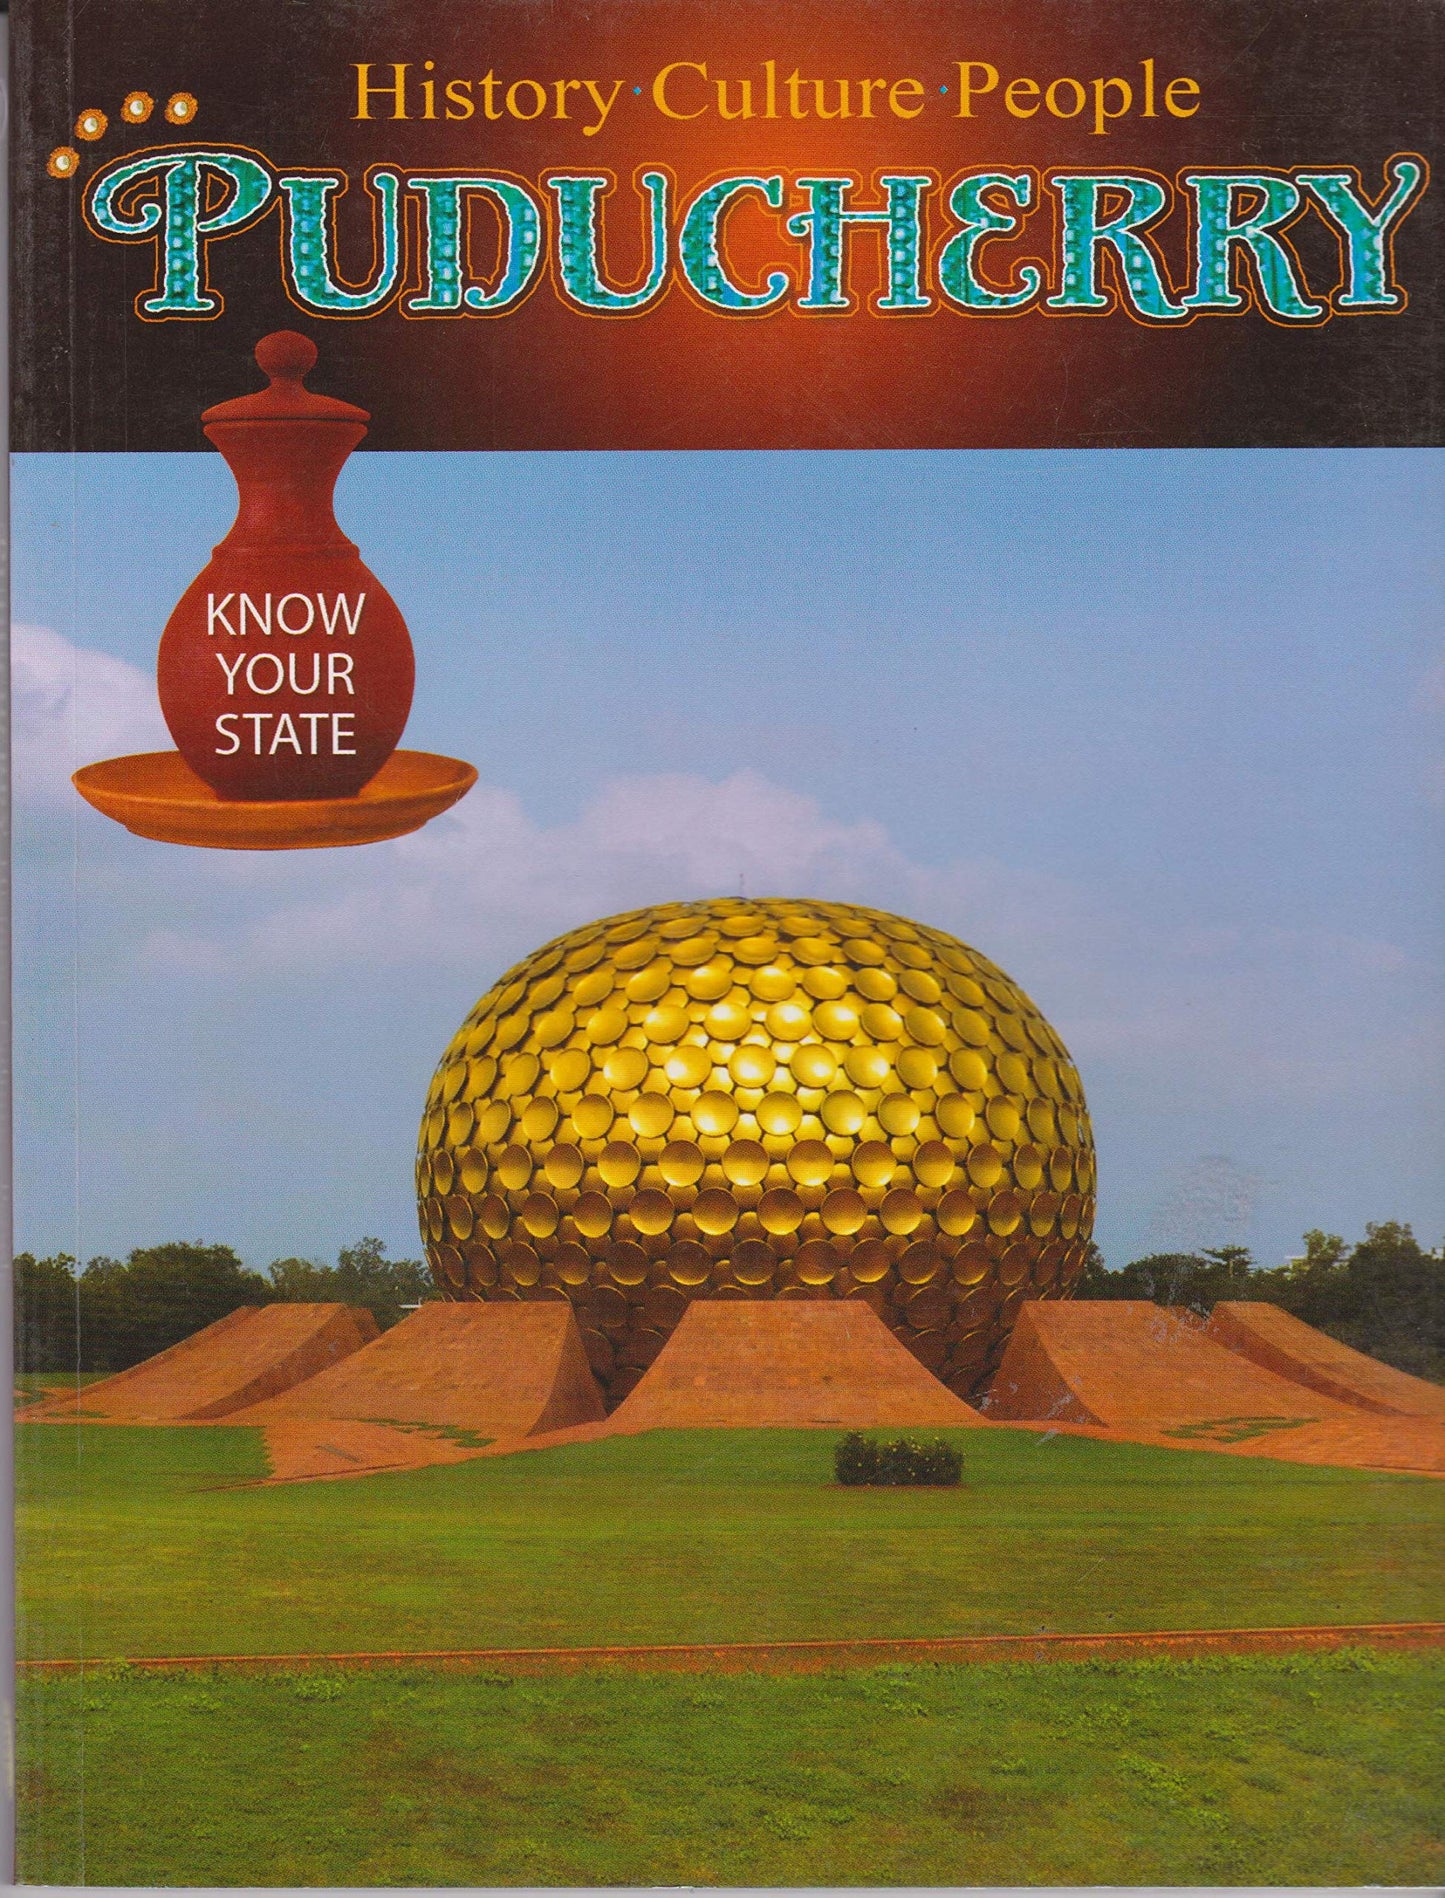 Know Your State, History Culture People - Puducherry